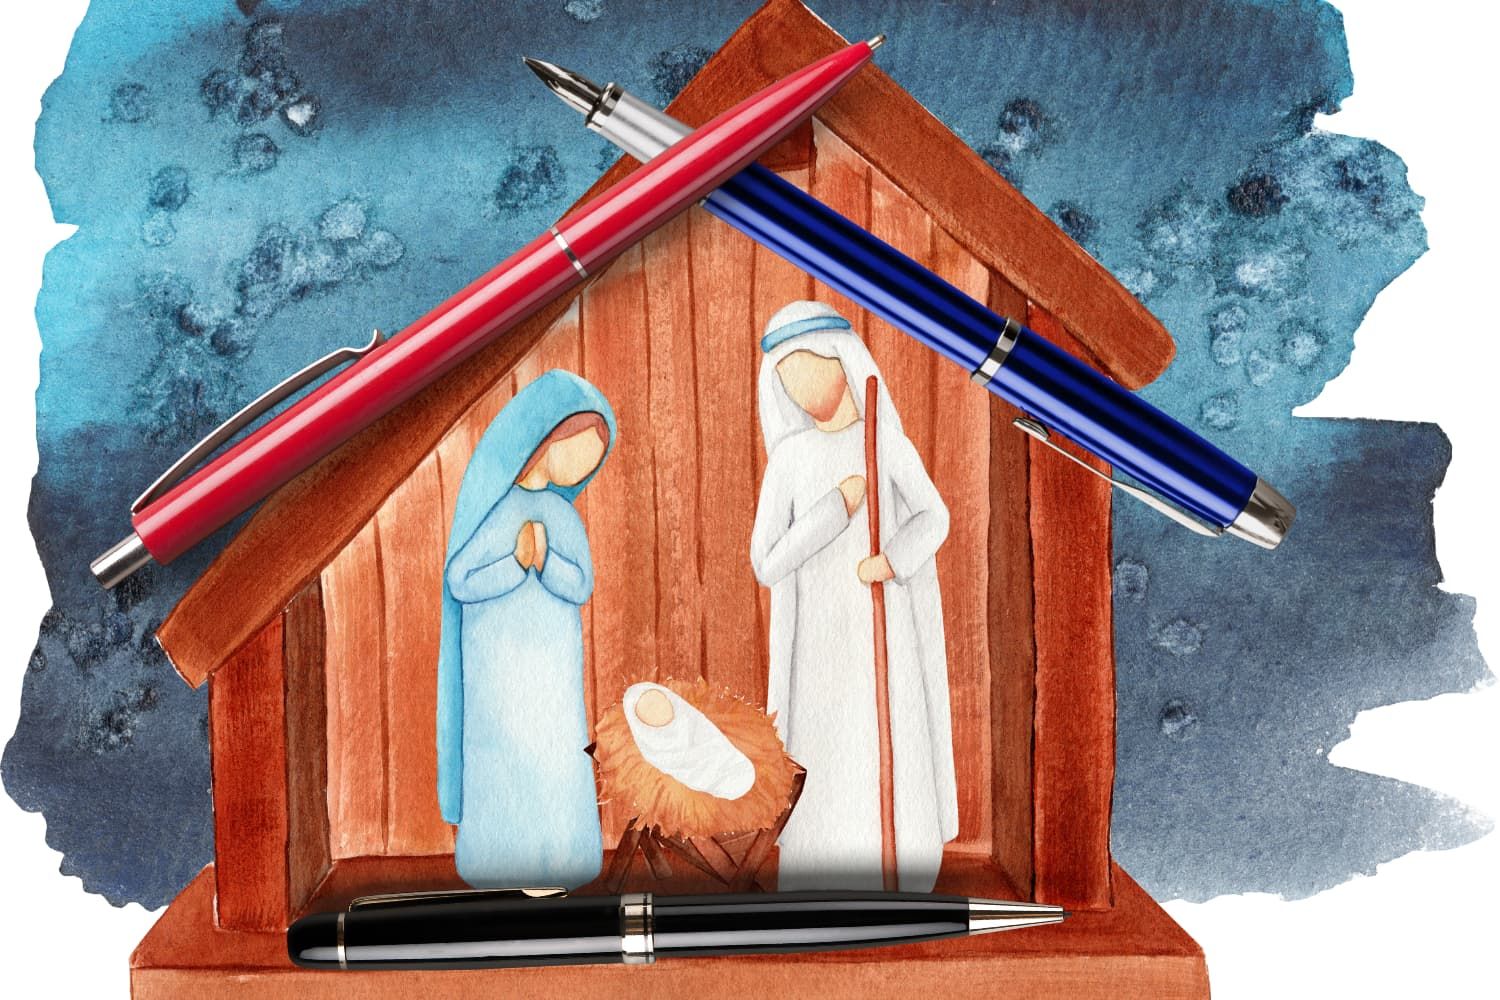 Experiment%20-%20Christmas%205%20Birth%20of%20Jesus%20-%20Invisible%20ink%20Nativity%20scene-aac0cbd8 Shelter